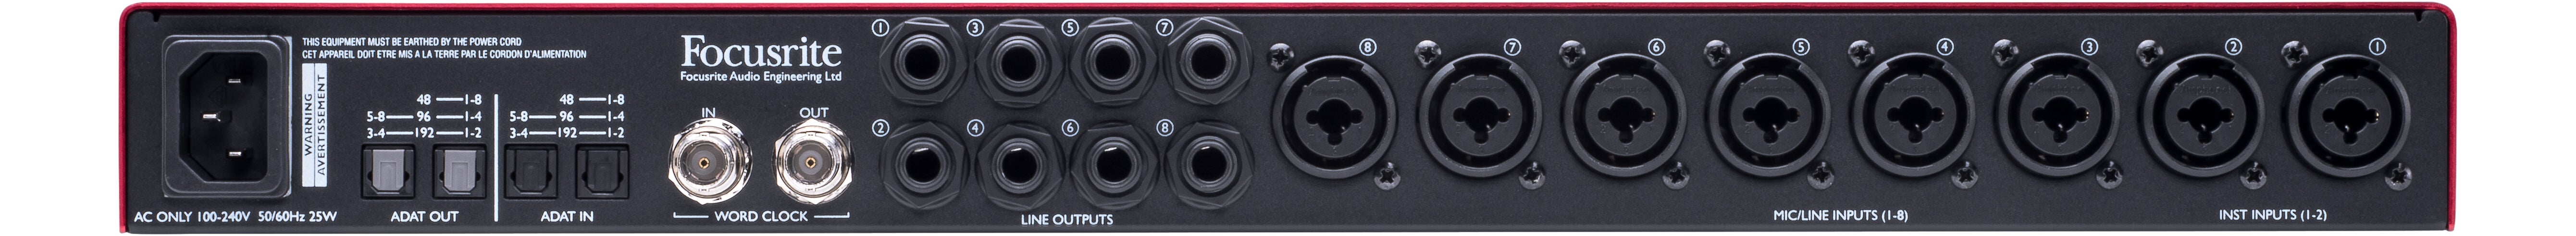 Focusrite Scarlett OctoPre Dynamic Eight-Channel Mic Pre With A-D/D-A Conversion and Analogue Compression - Mic Preamp - Professional Audio Design, Inc